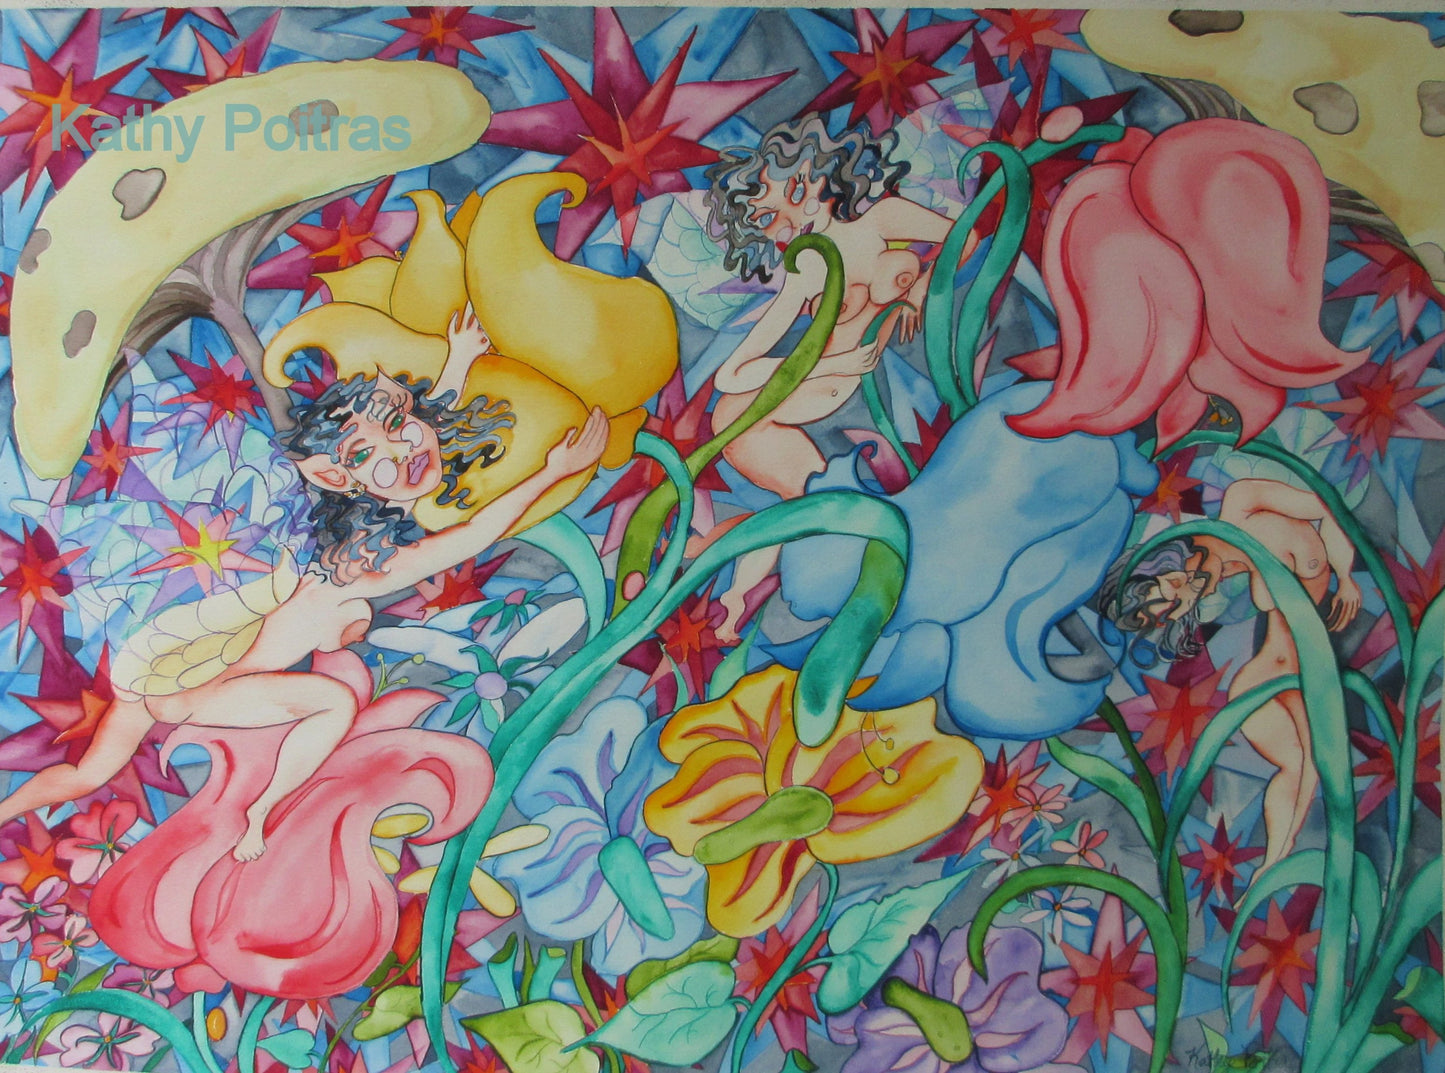 Fairies having a wild party among the flowers. On 22 x 30 inch rag paper.   by Canadian artist, Kathy Poitras.  An early work. 